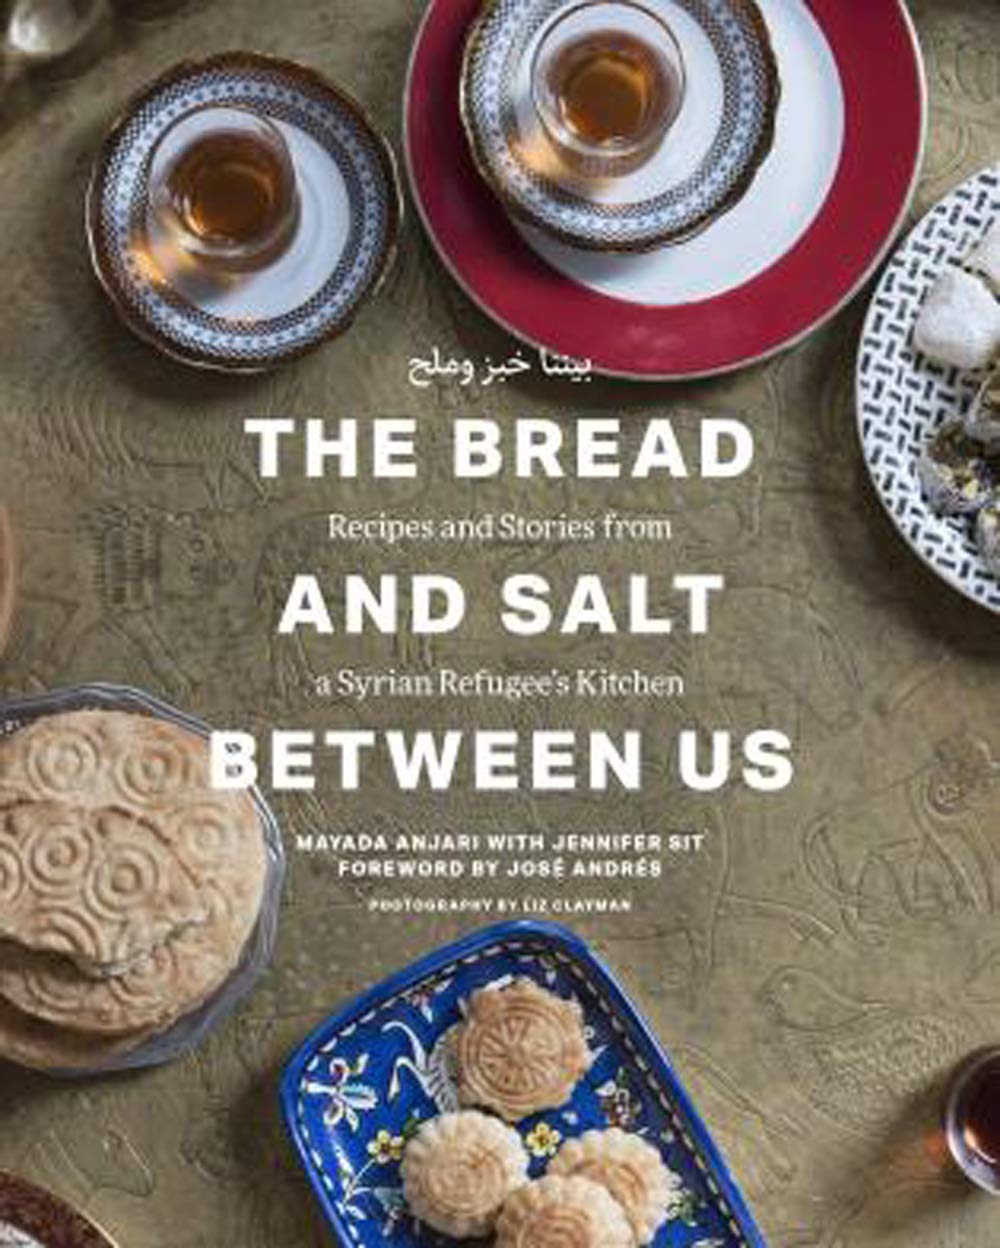 The Bread and Salt Between Us: Recipes and Stories from a Syrian Refugee's Kitchen (Mayada Anjari, Jennifer Sit)